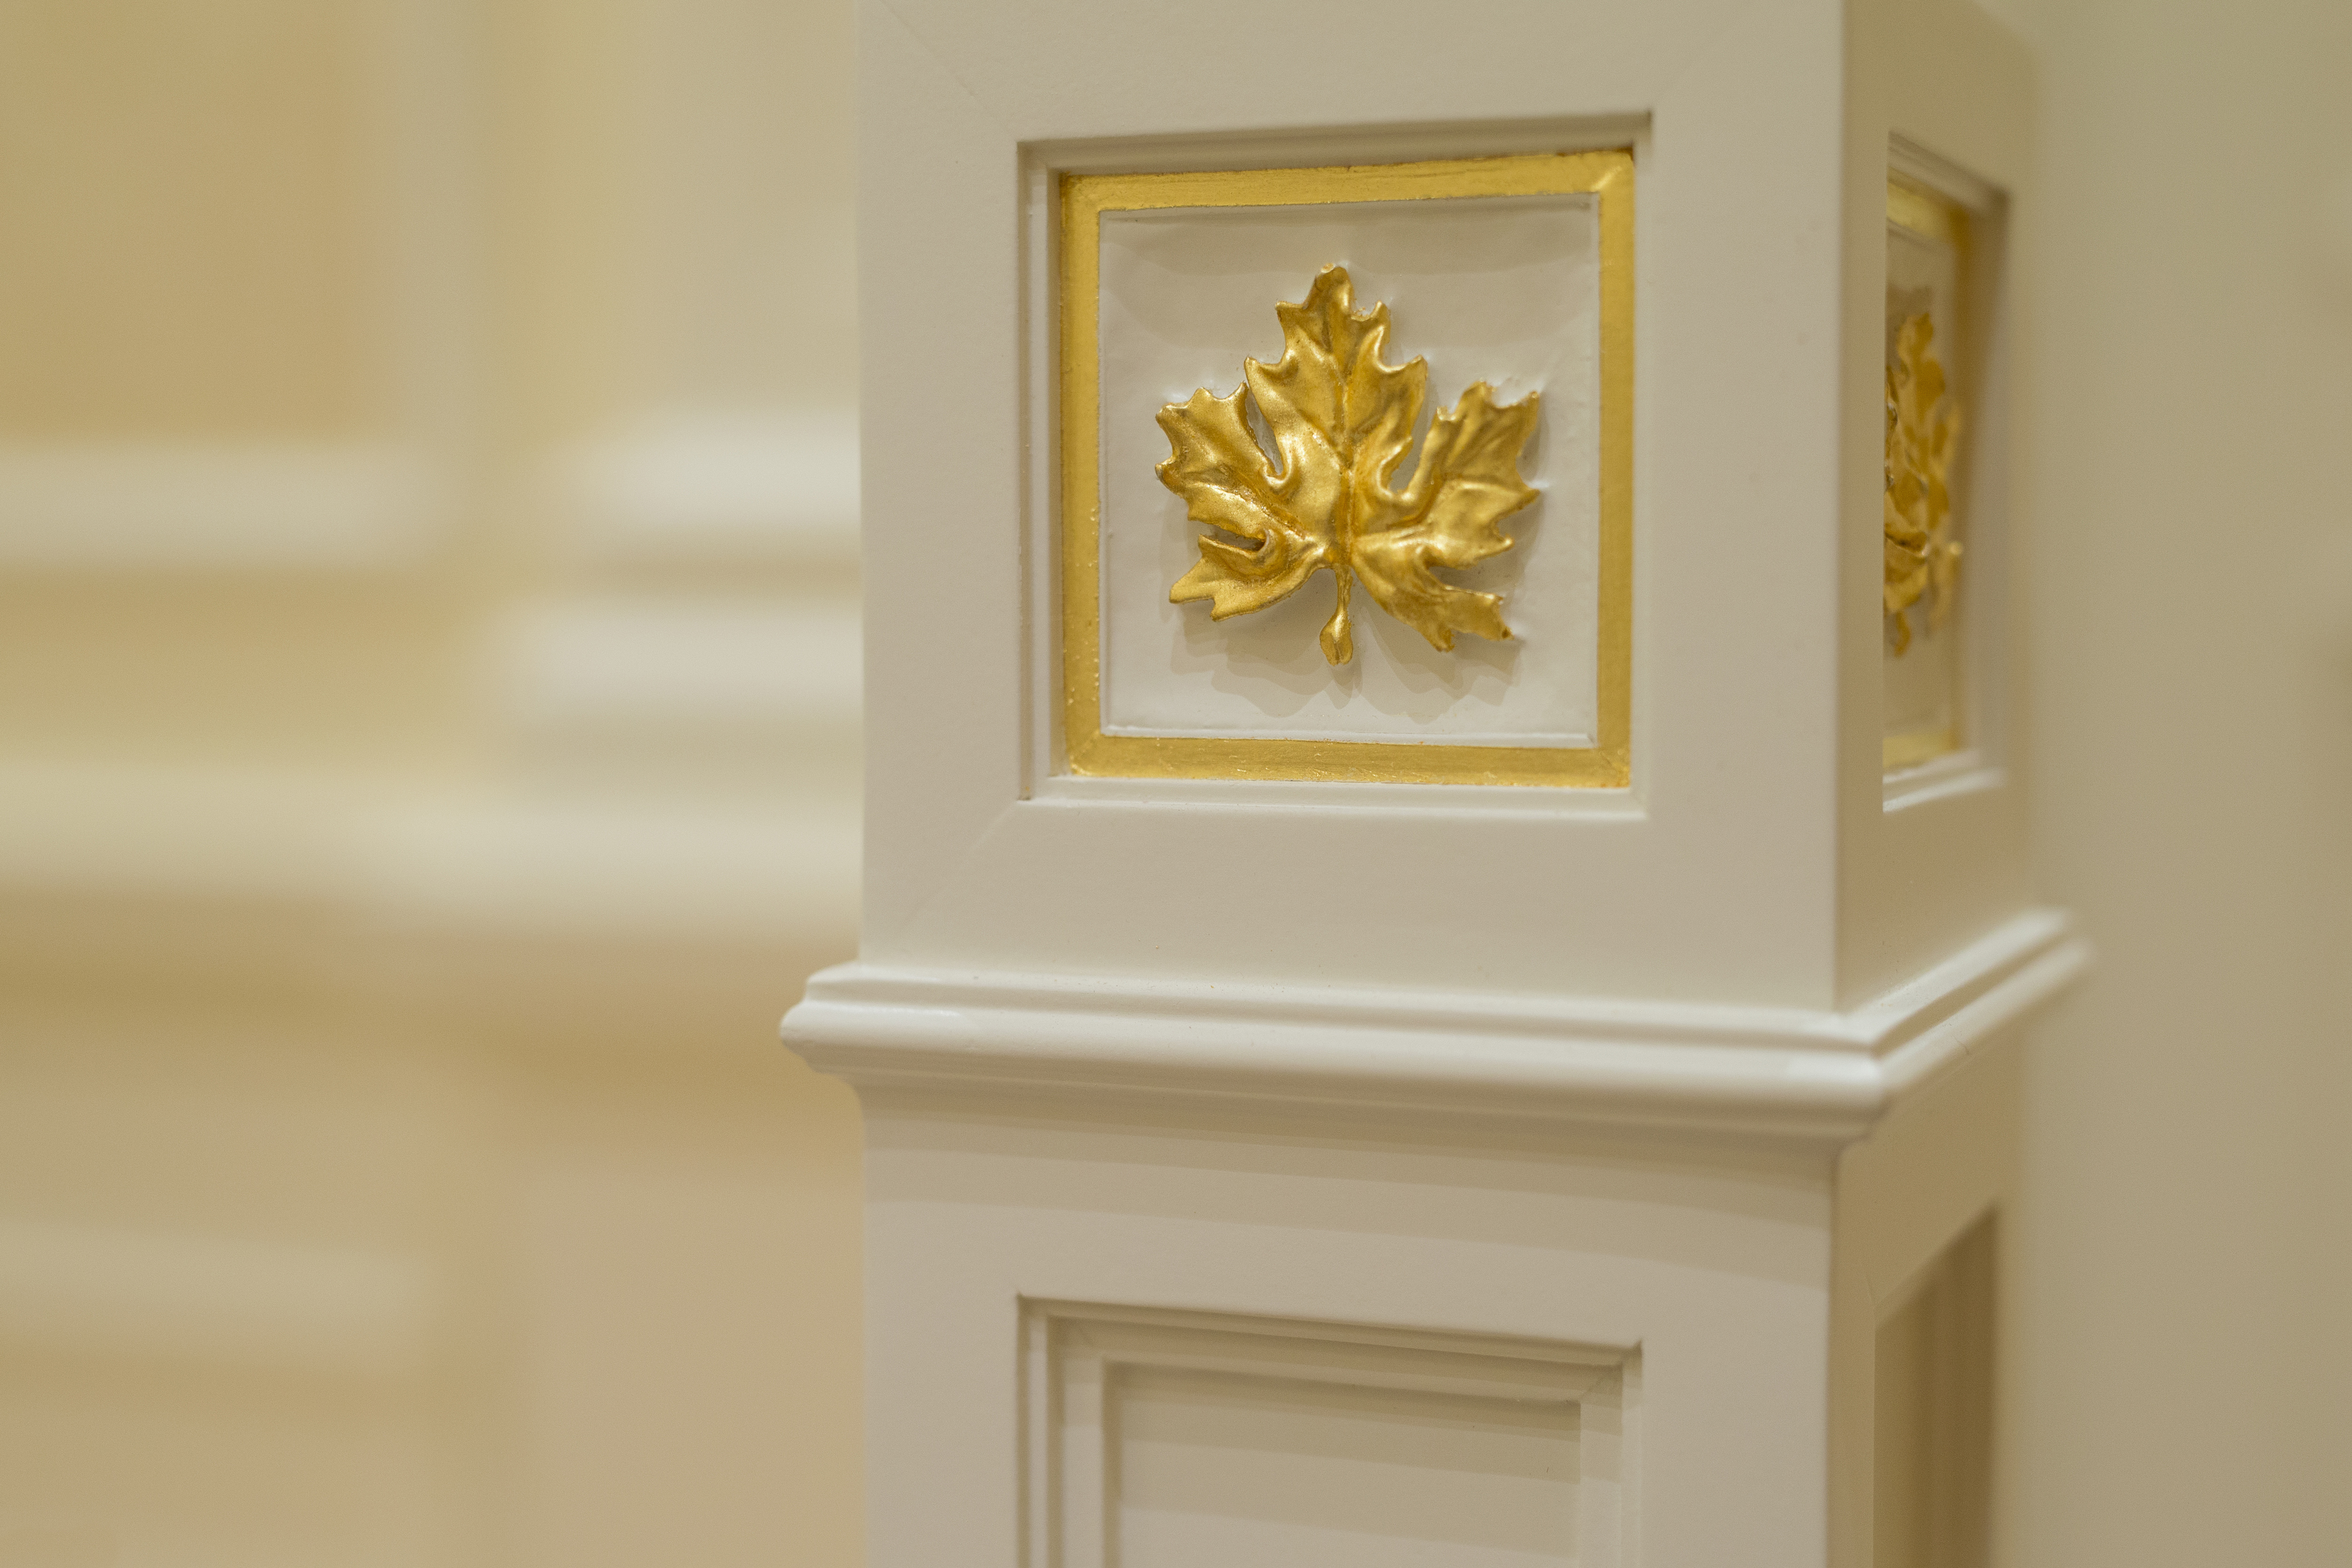 Montreal_Temple_Interior_details6_2015-resized.jpg